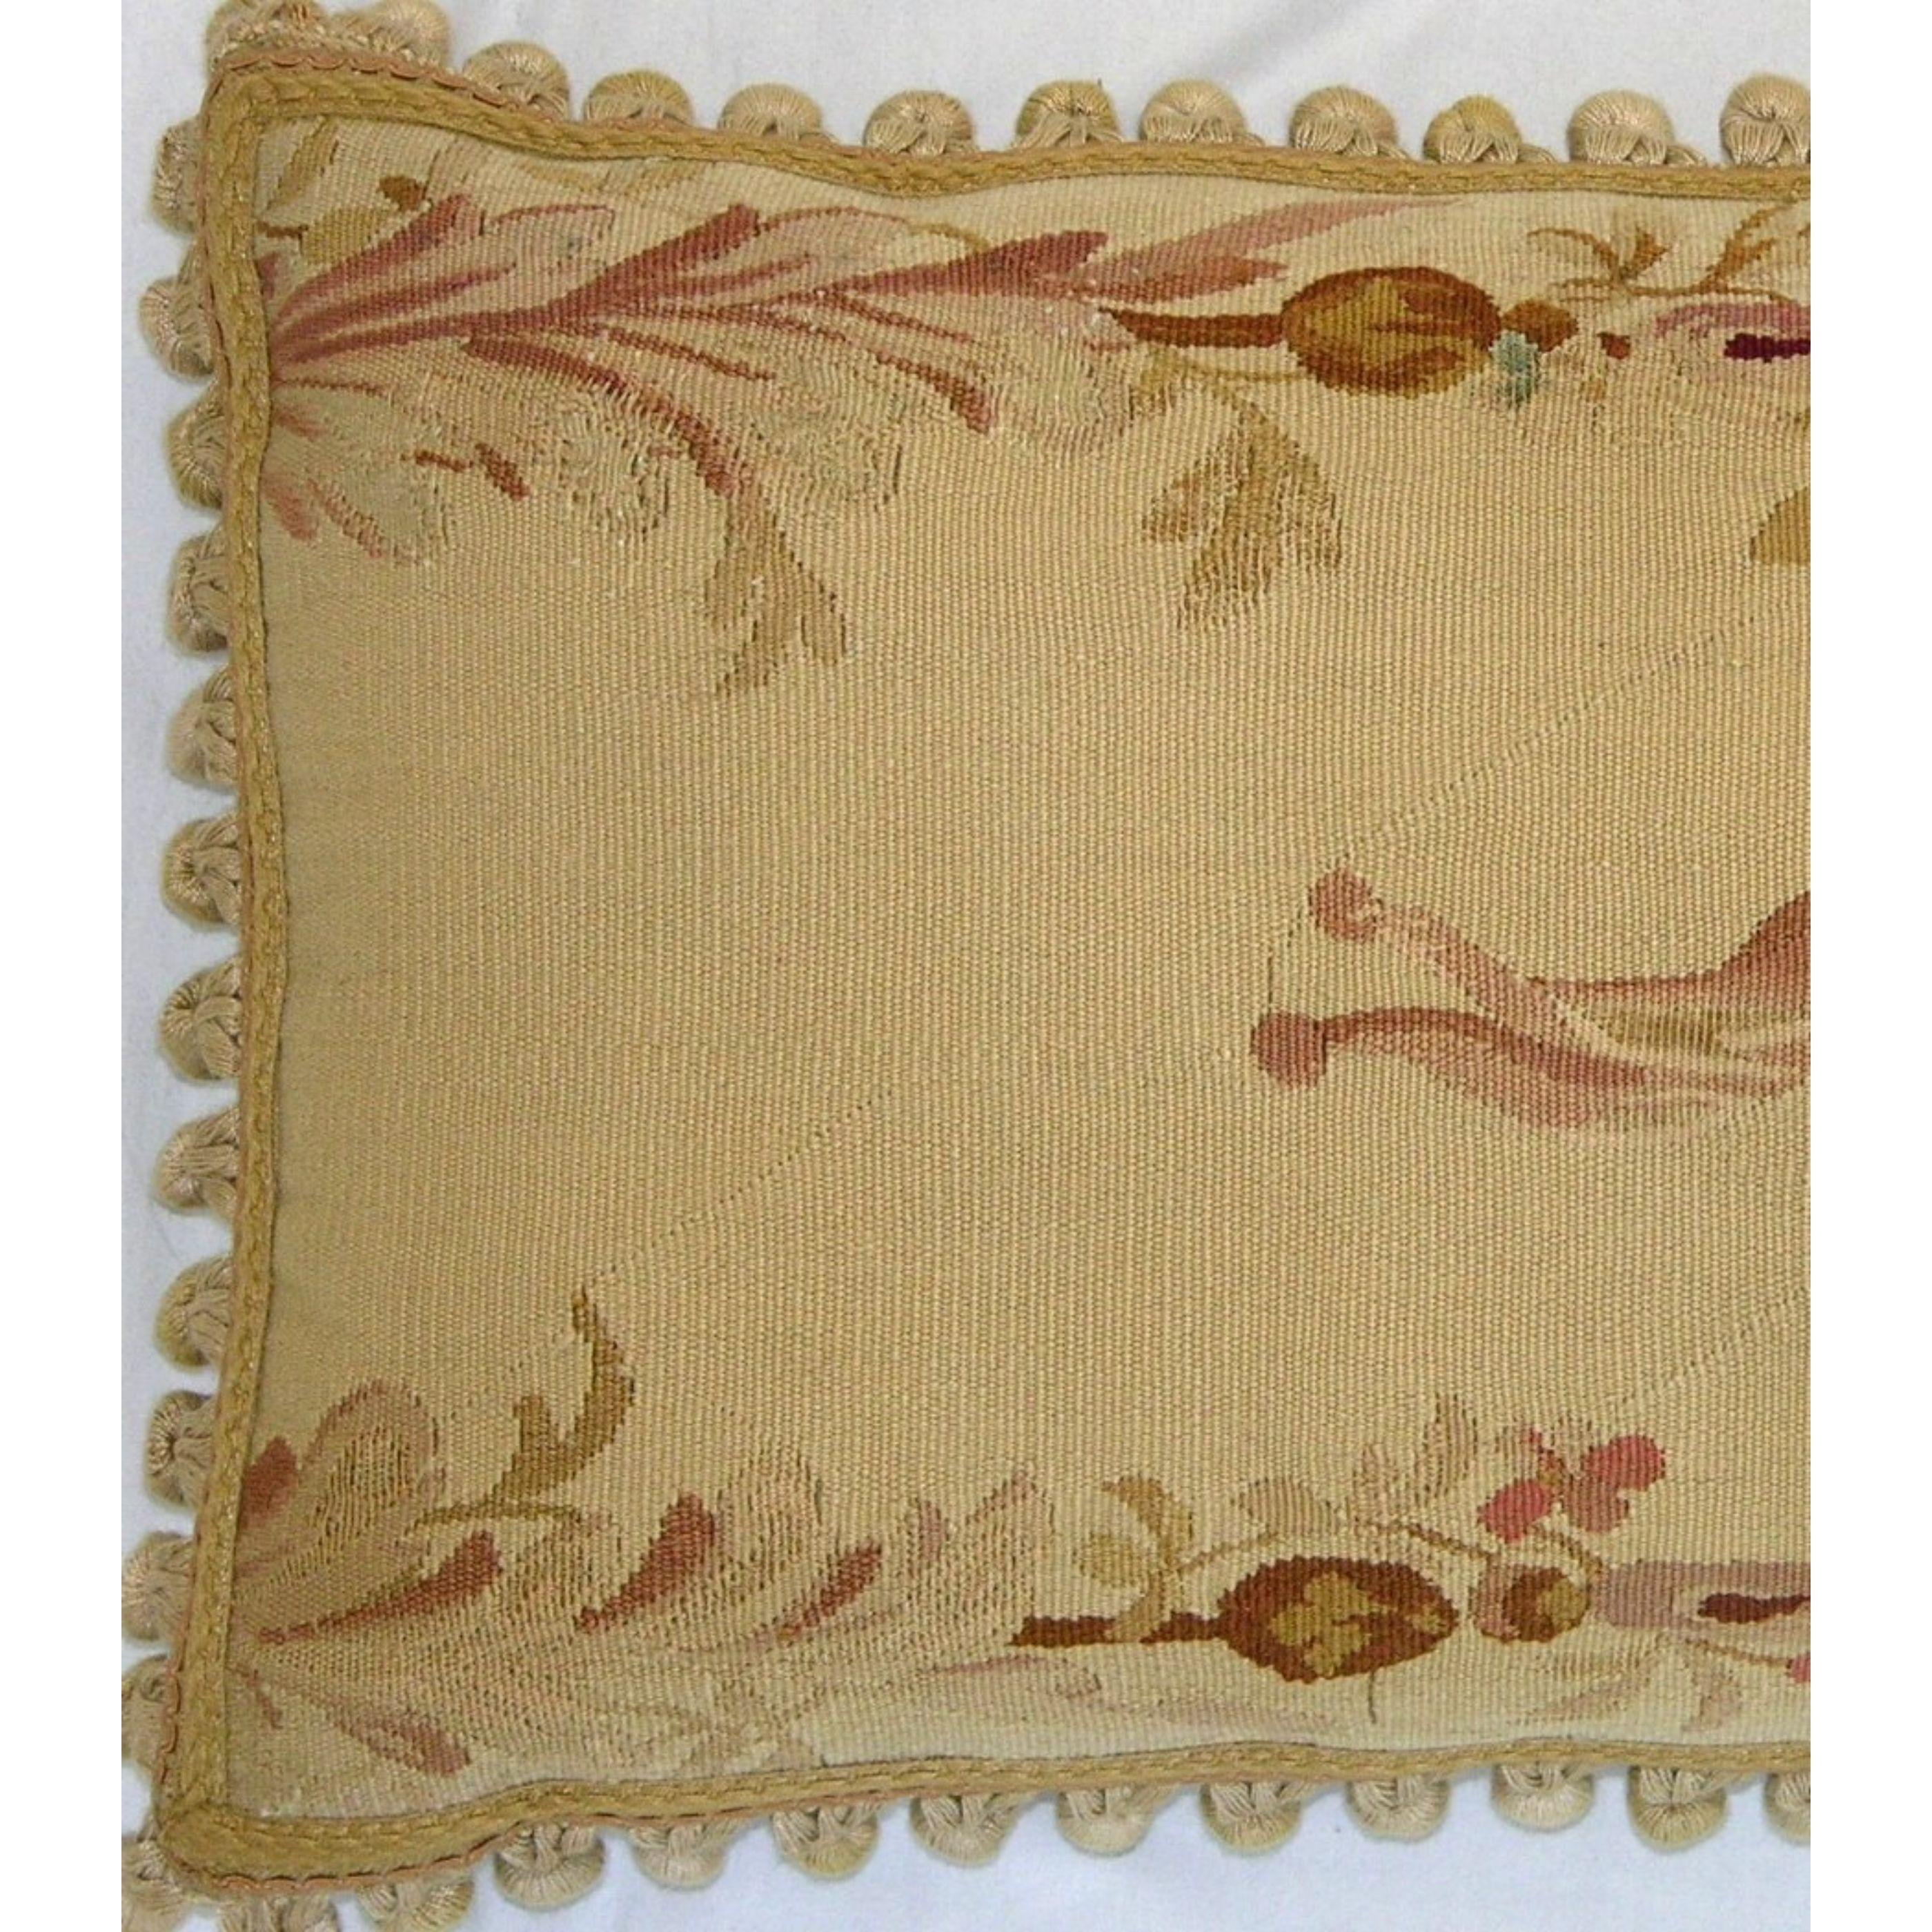 Ca.1870 Antique French Aubusson Tapestry Pillow
